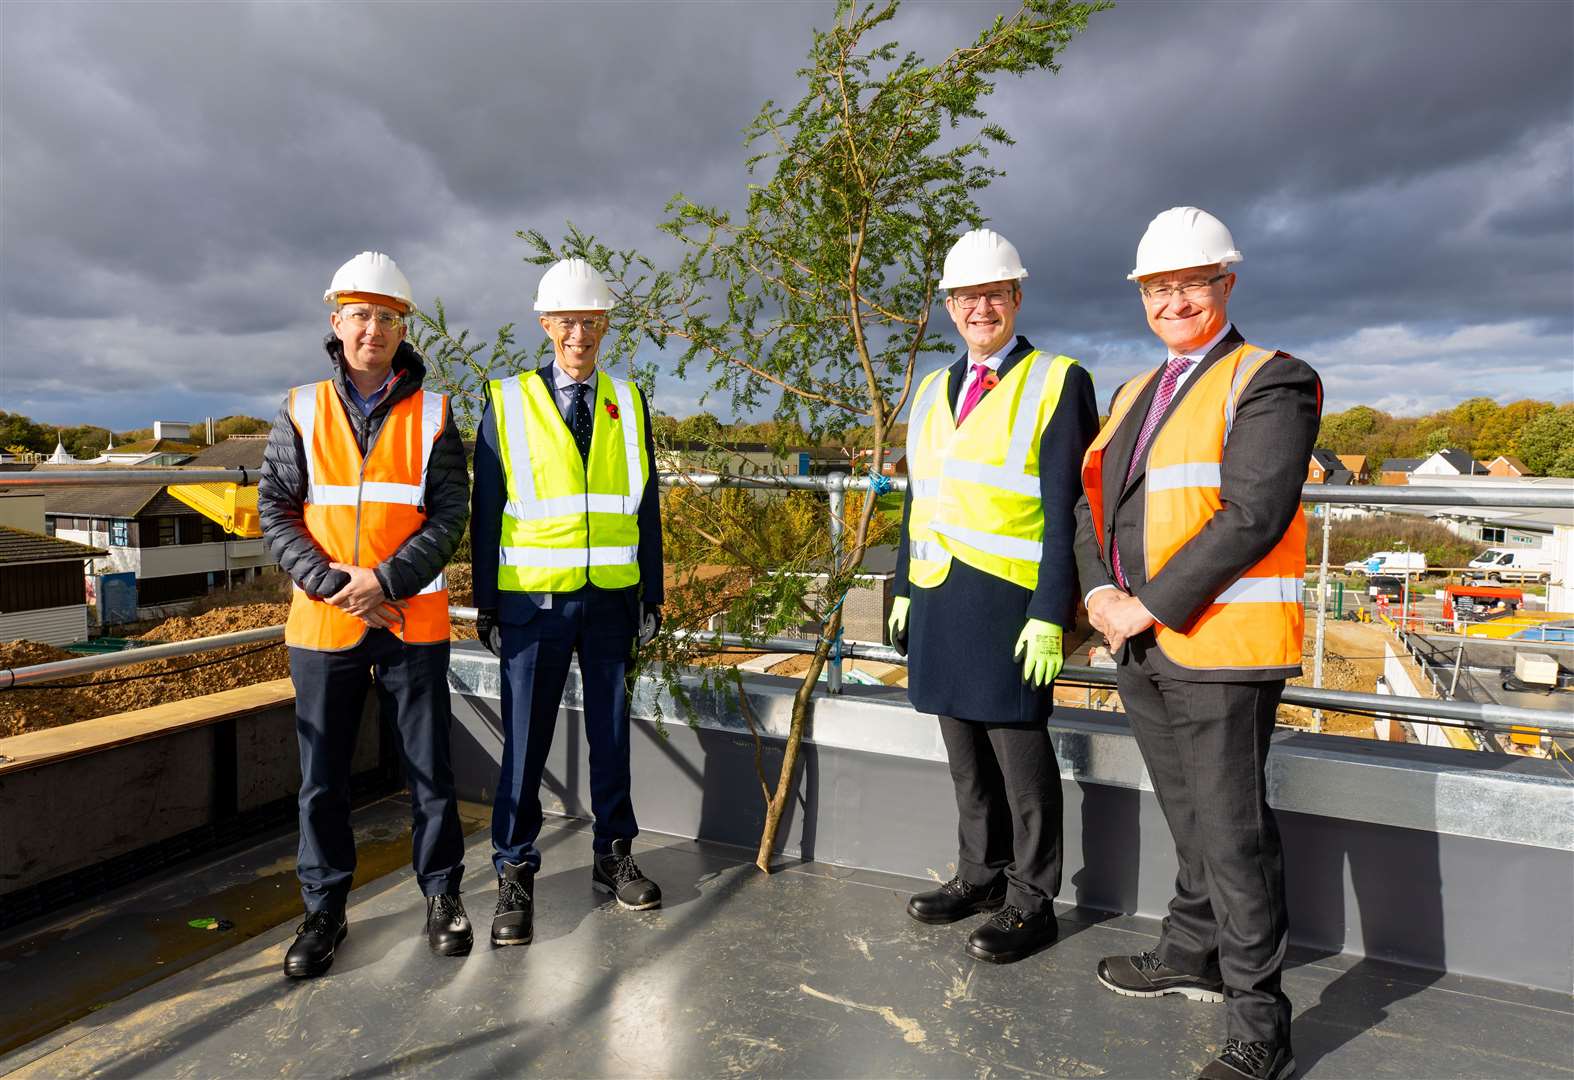 A “topping out” ceremony was held on the roof of the building